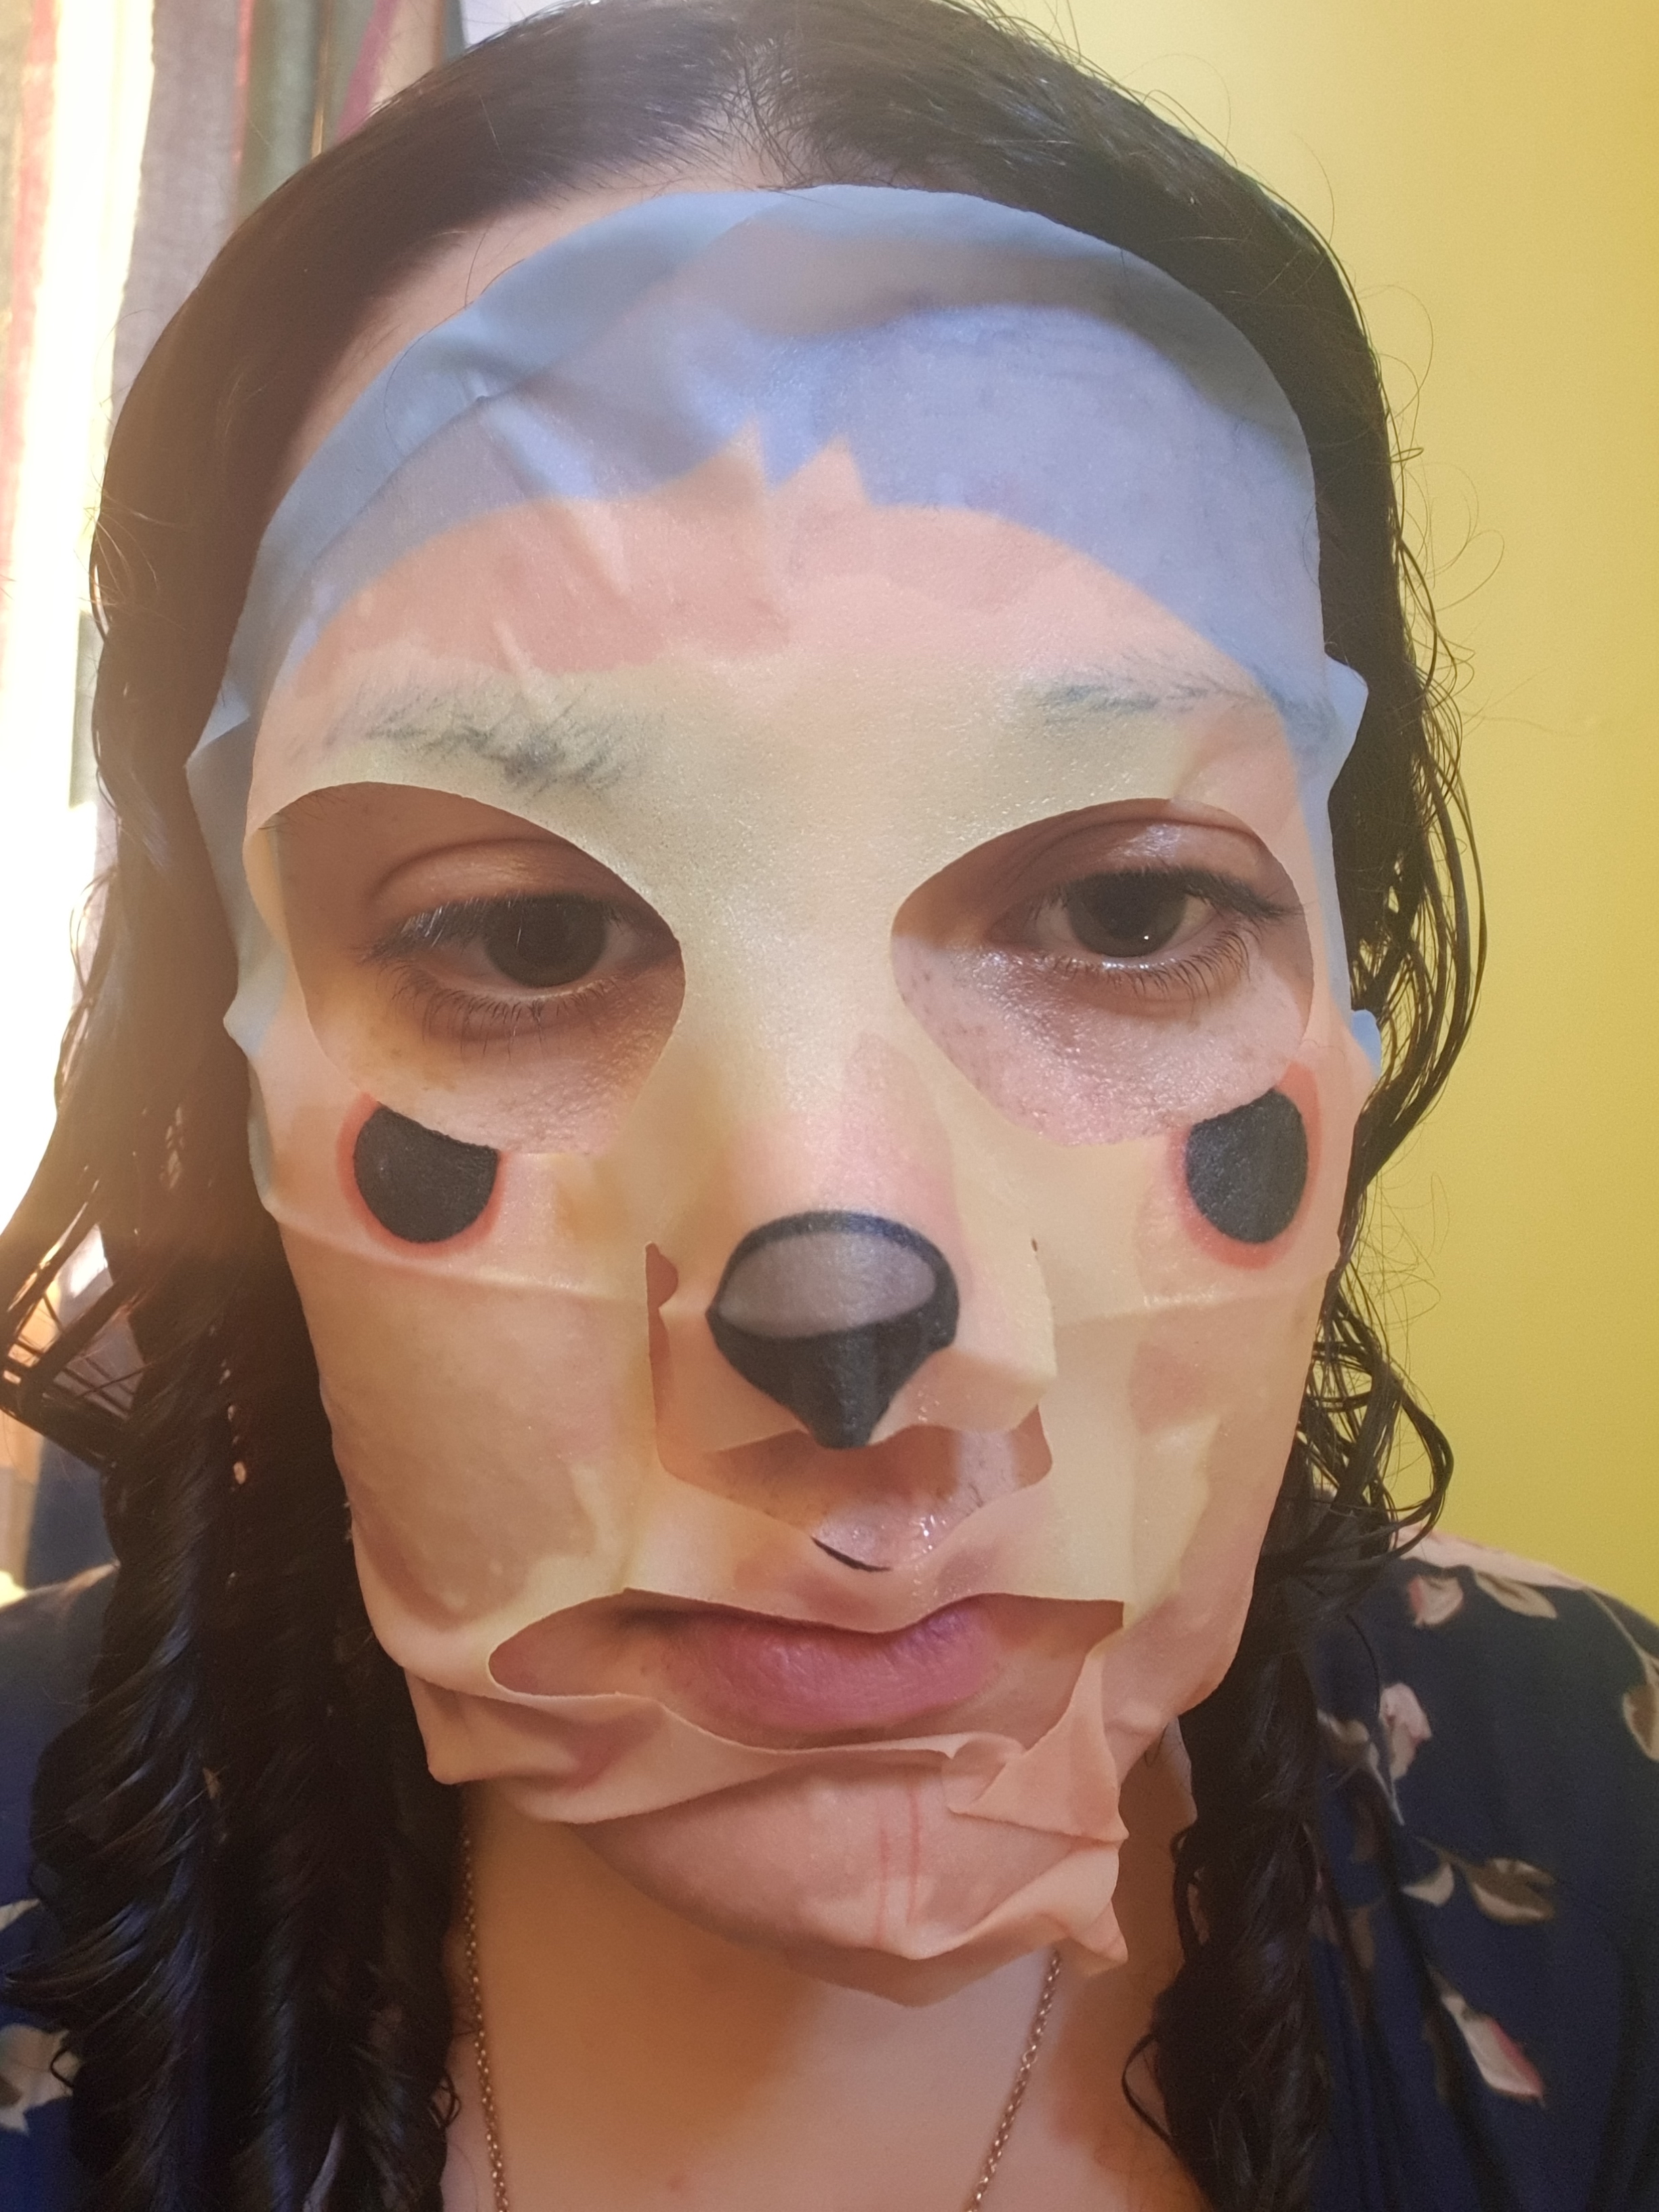 Marika in a thin face mask for skin care, it has a sloths nose printed on it.